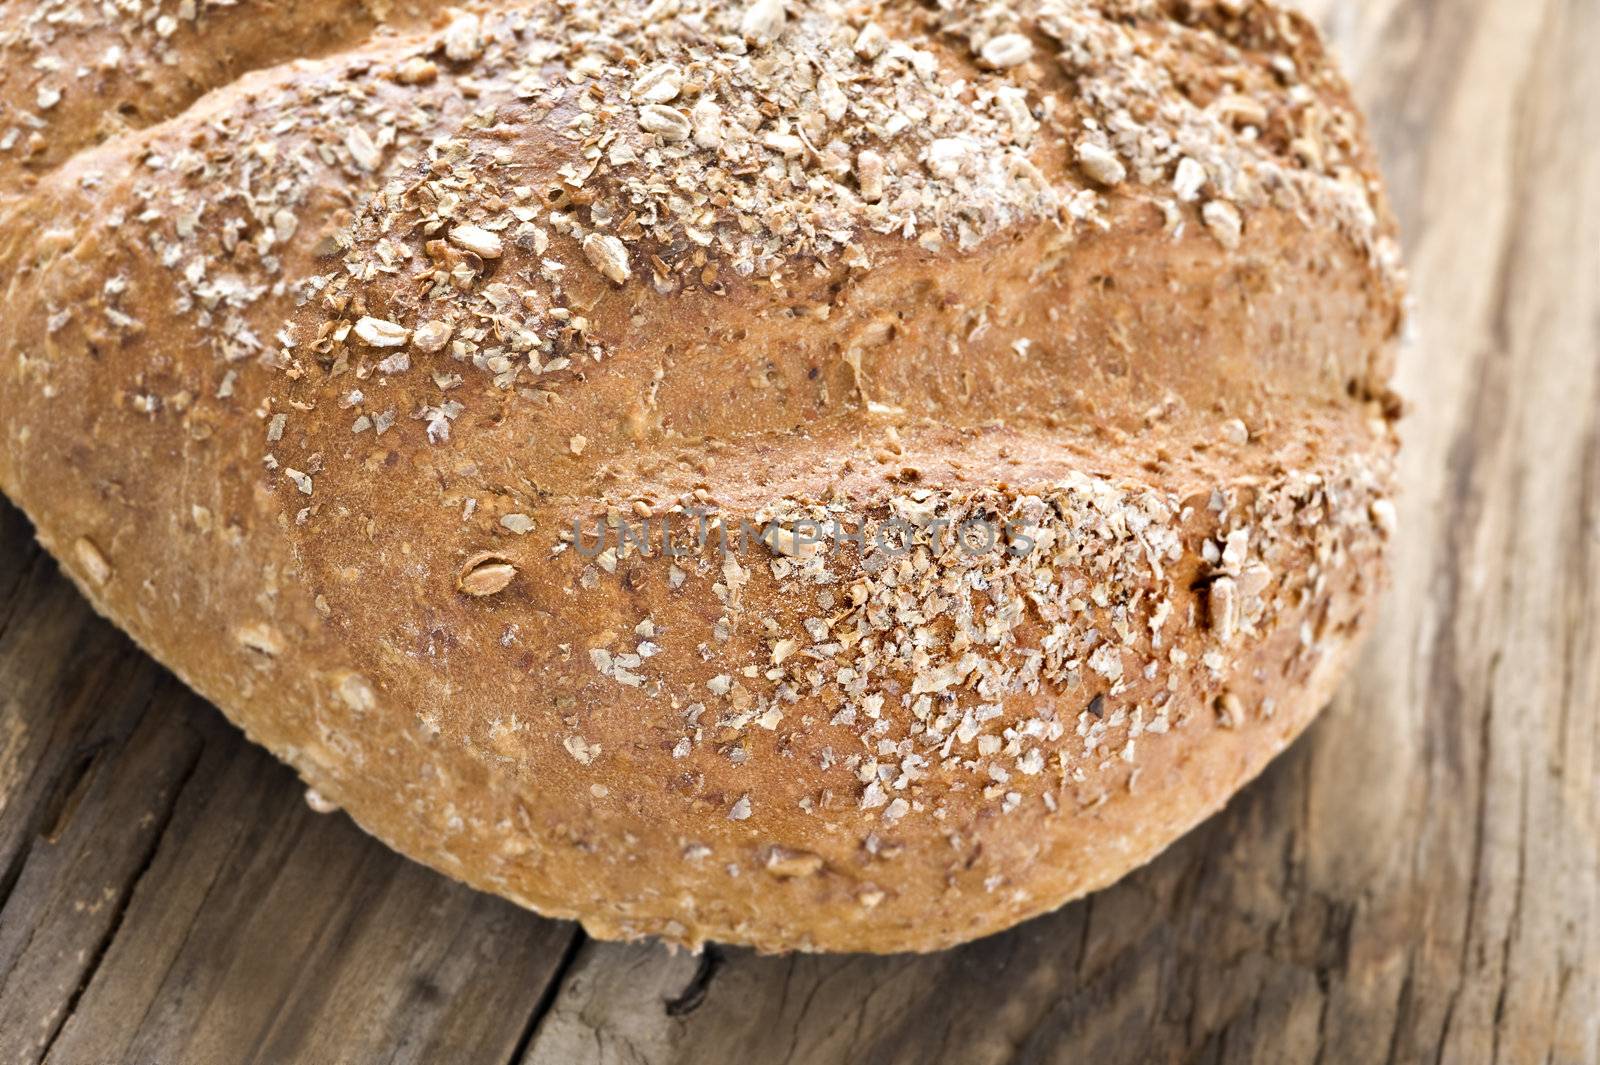 Healthy whole wheat bread - close up with shallow depth of field